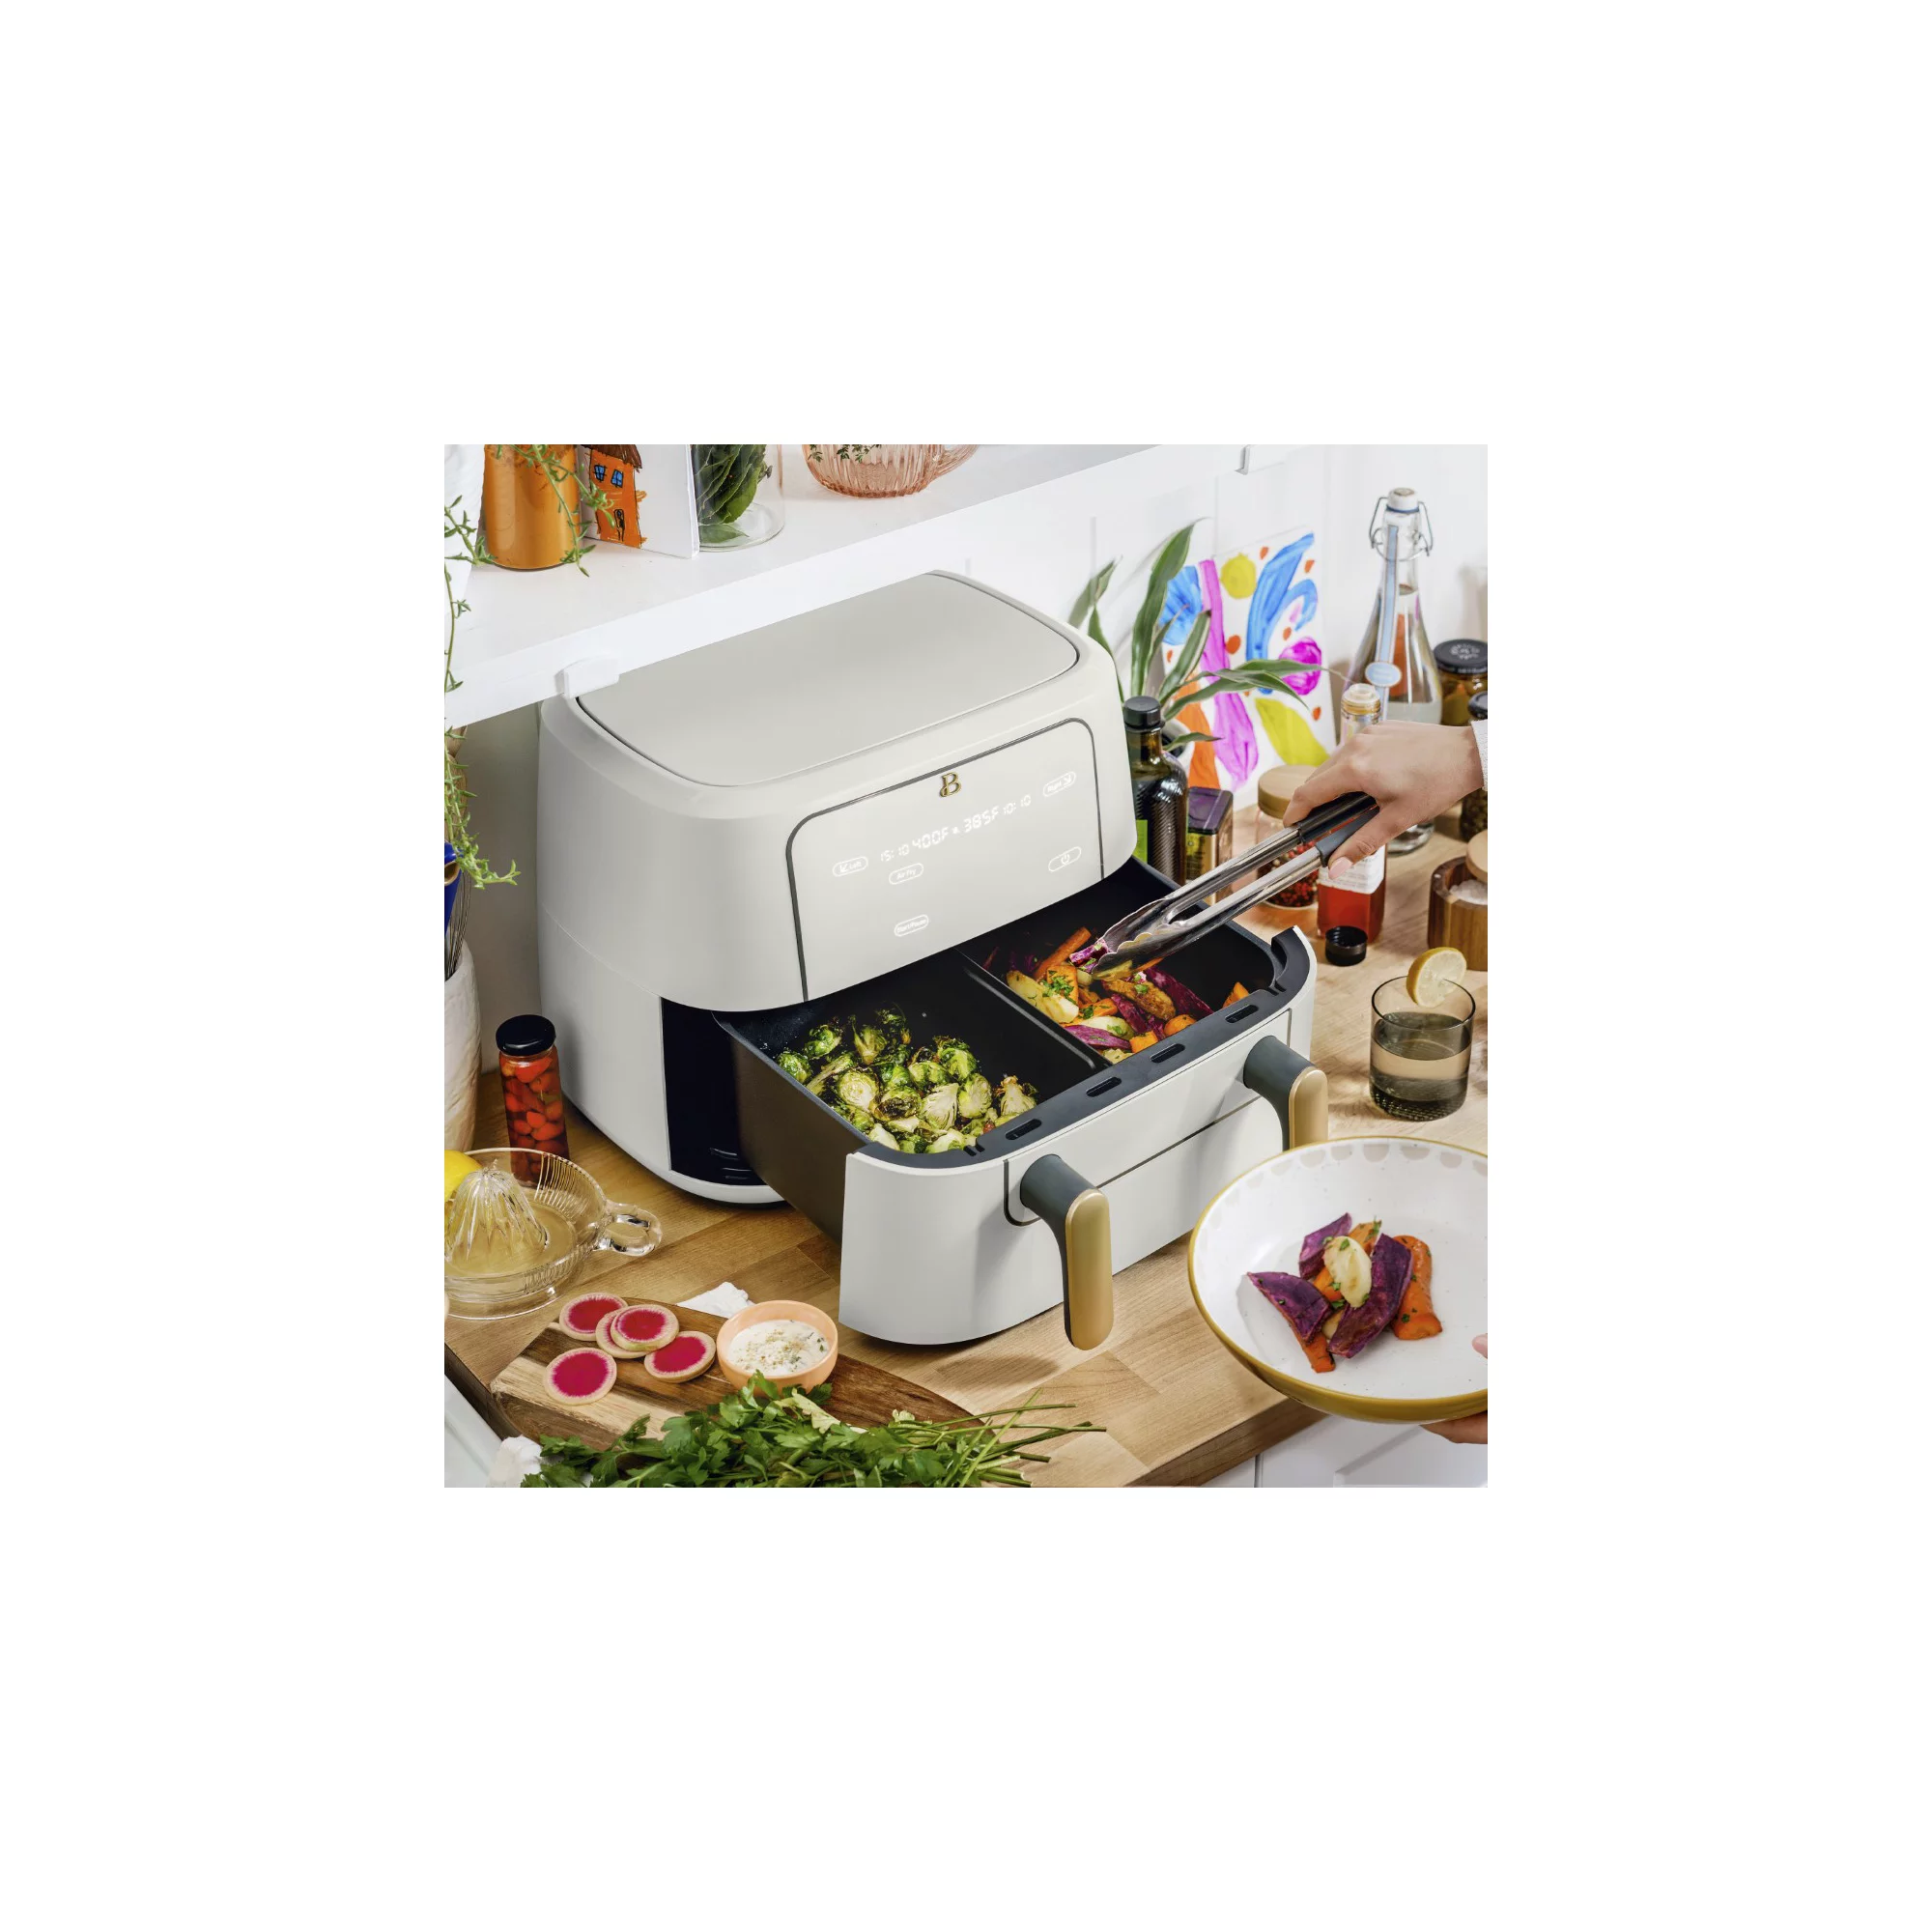 https://discounttoday.net/wp-content/uploads/2023/02/Beautiful-9QT-TriZone-Air-Fryer-White-Icing-by-Drew-Barrymore-1.webp